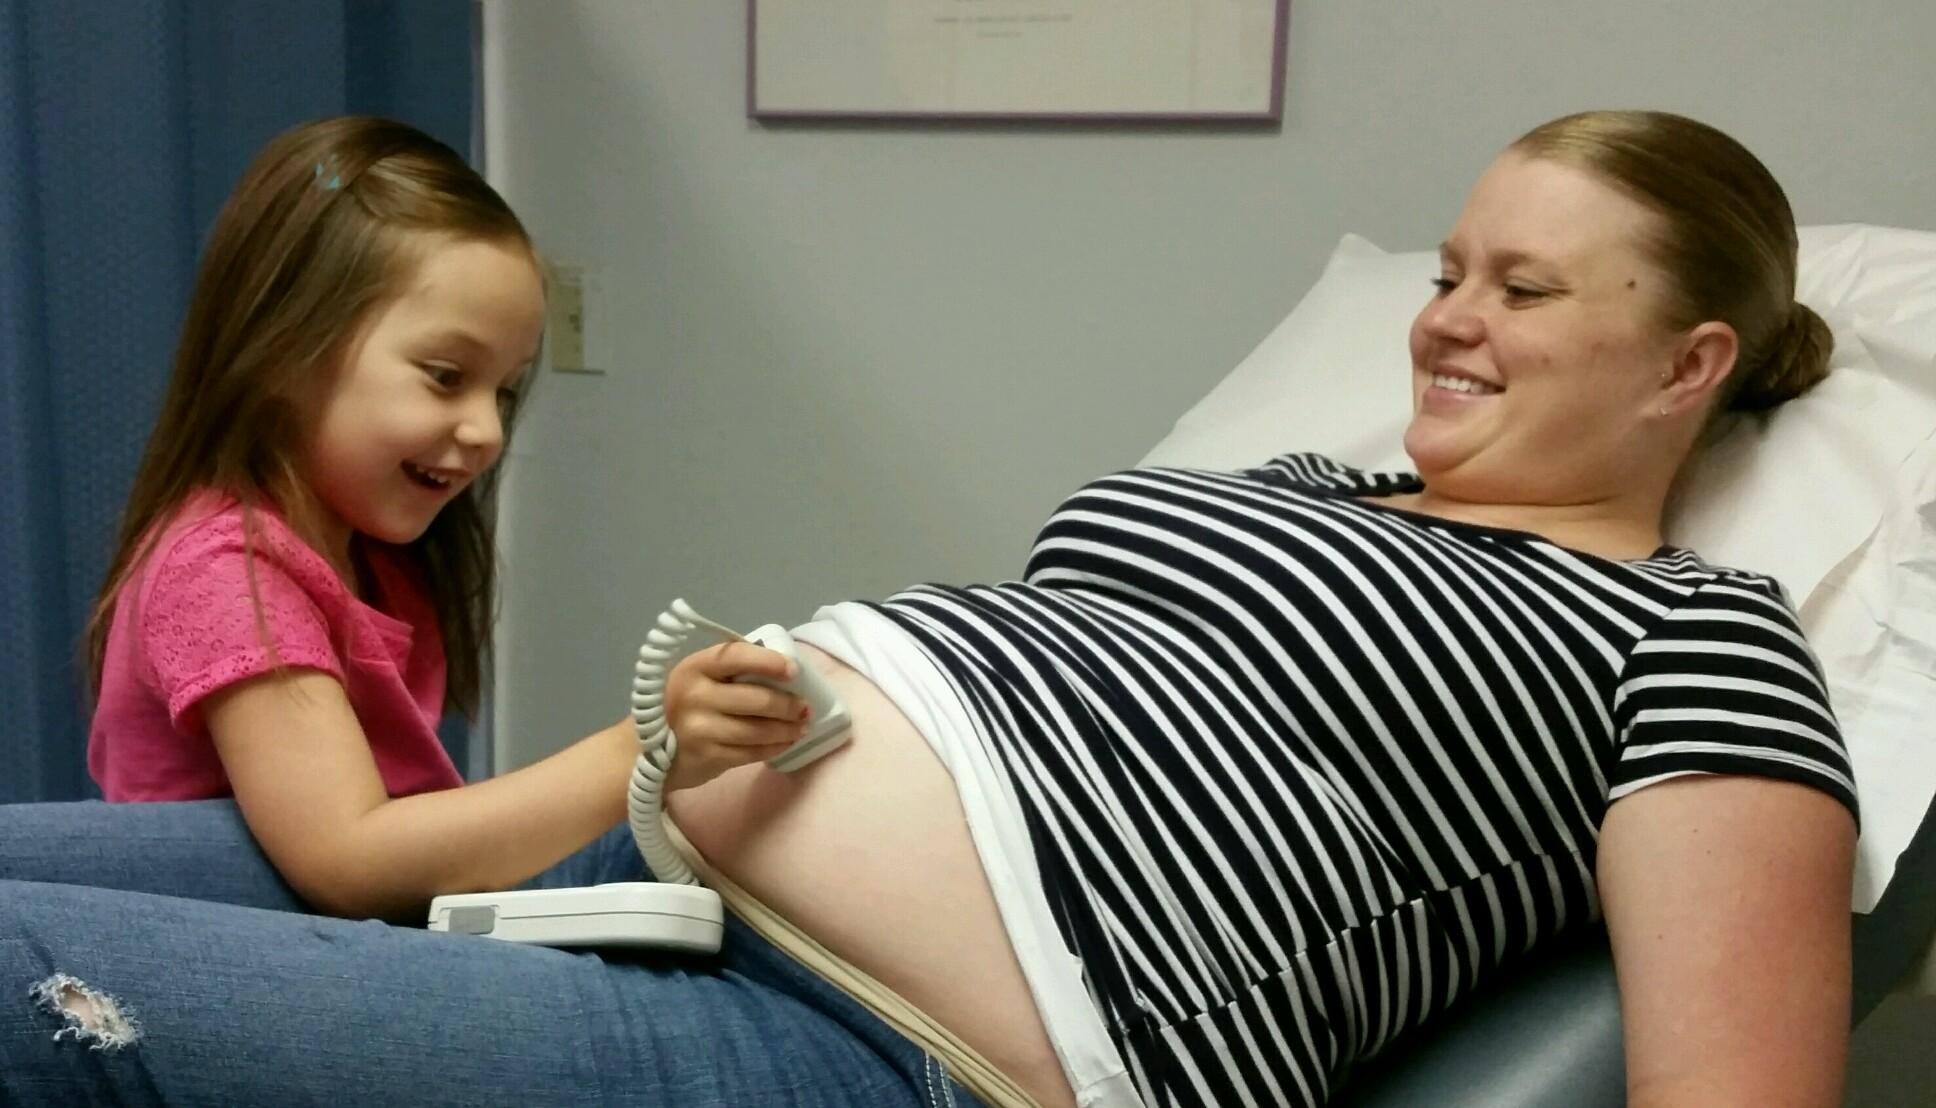 A child using an ultrasound on her expecting mother